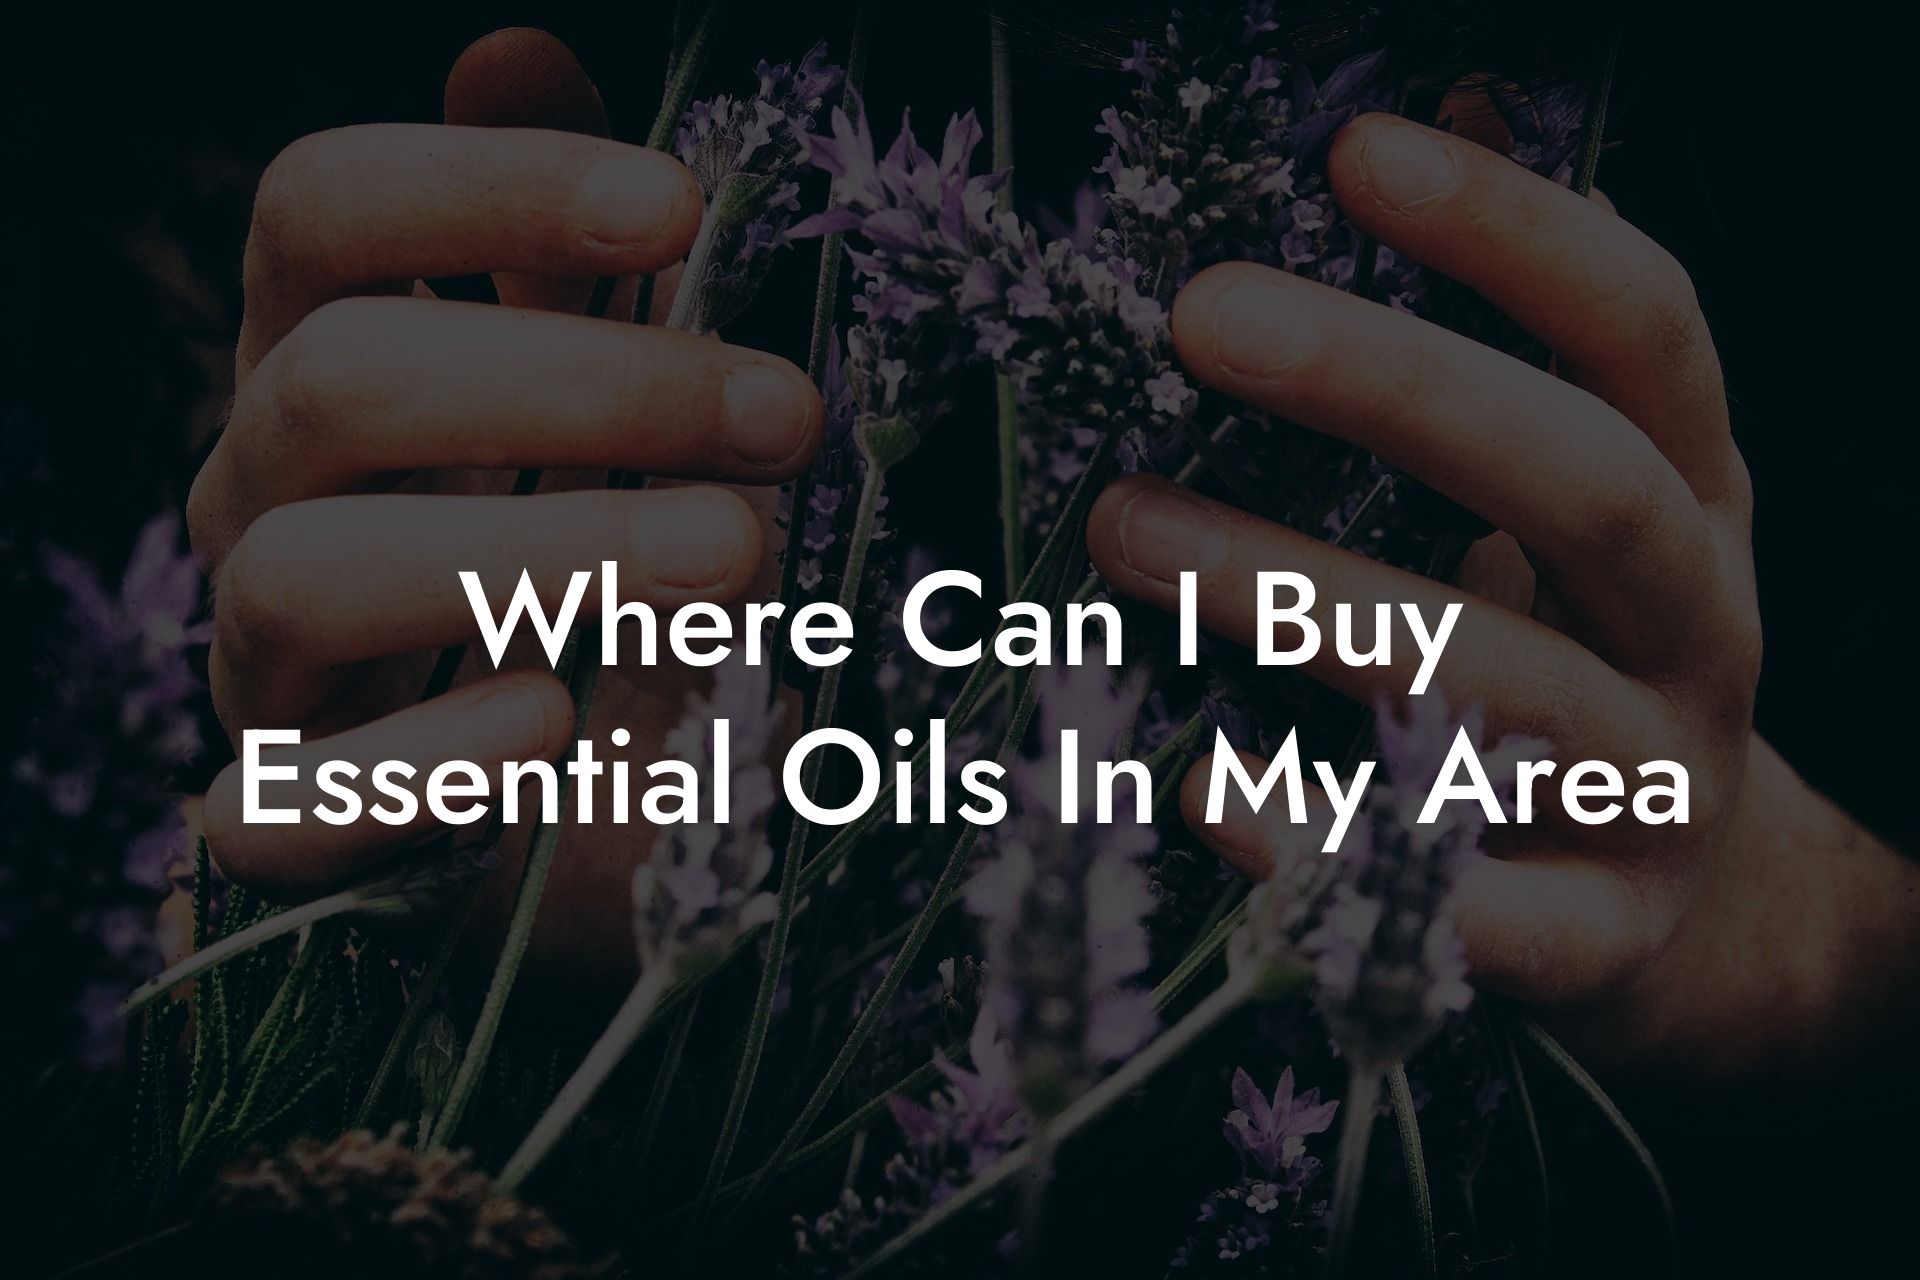 Where Can I Buy Essential Oils In My Area